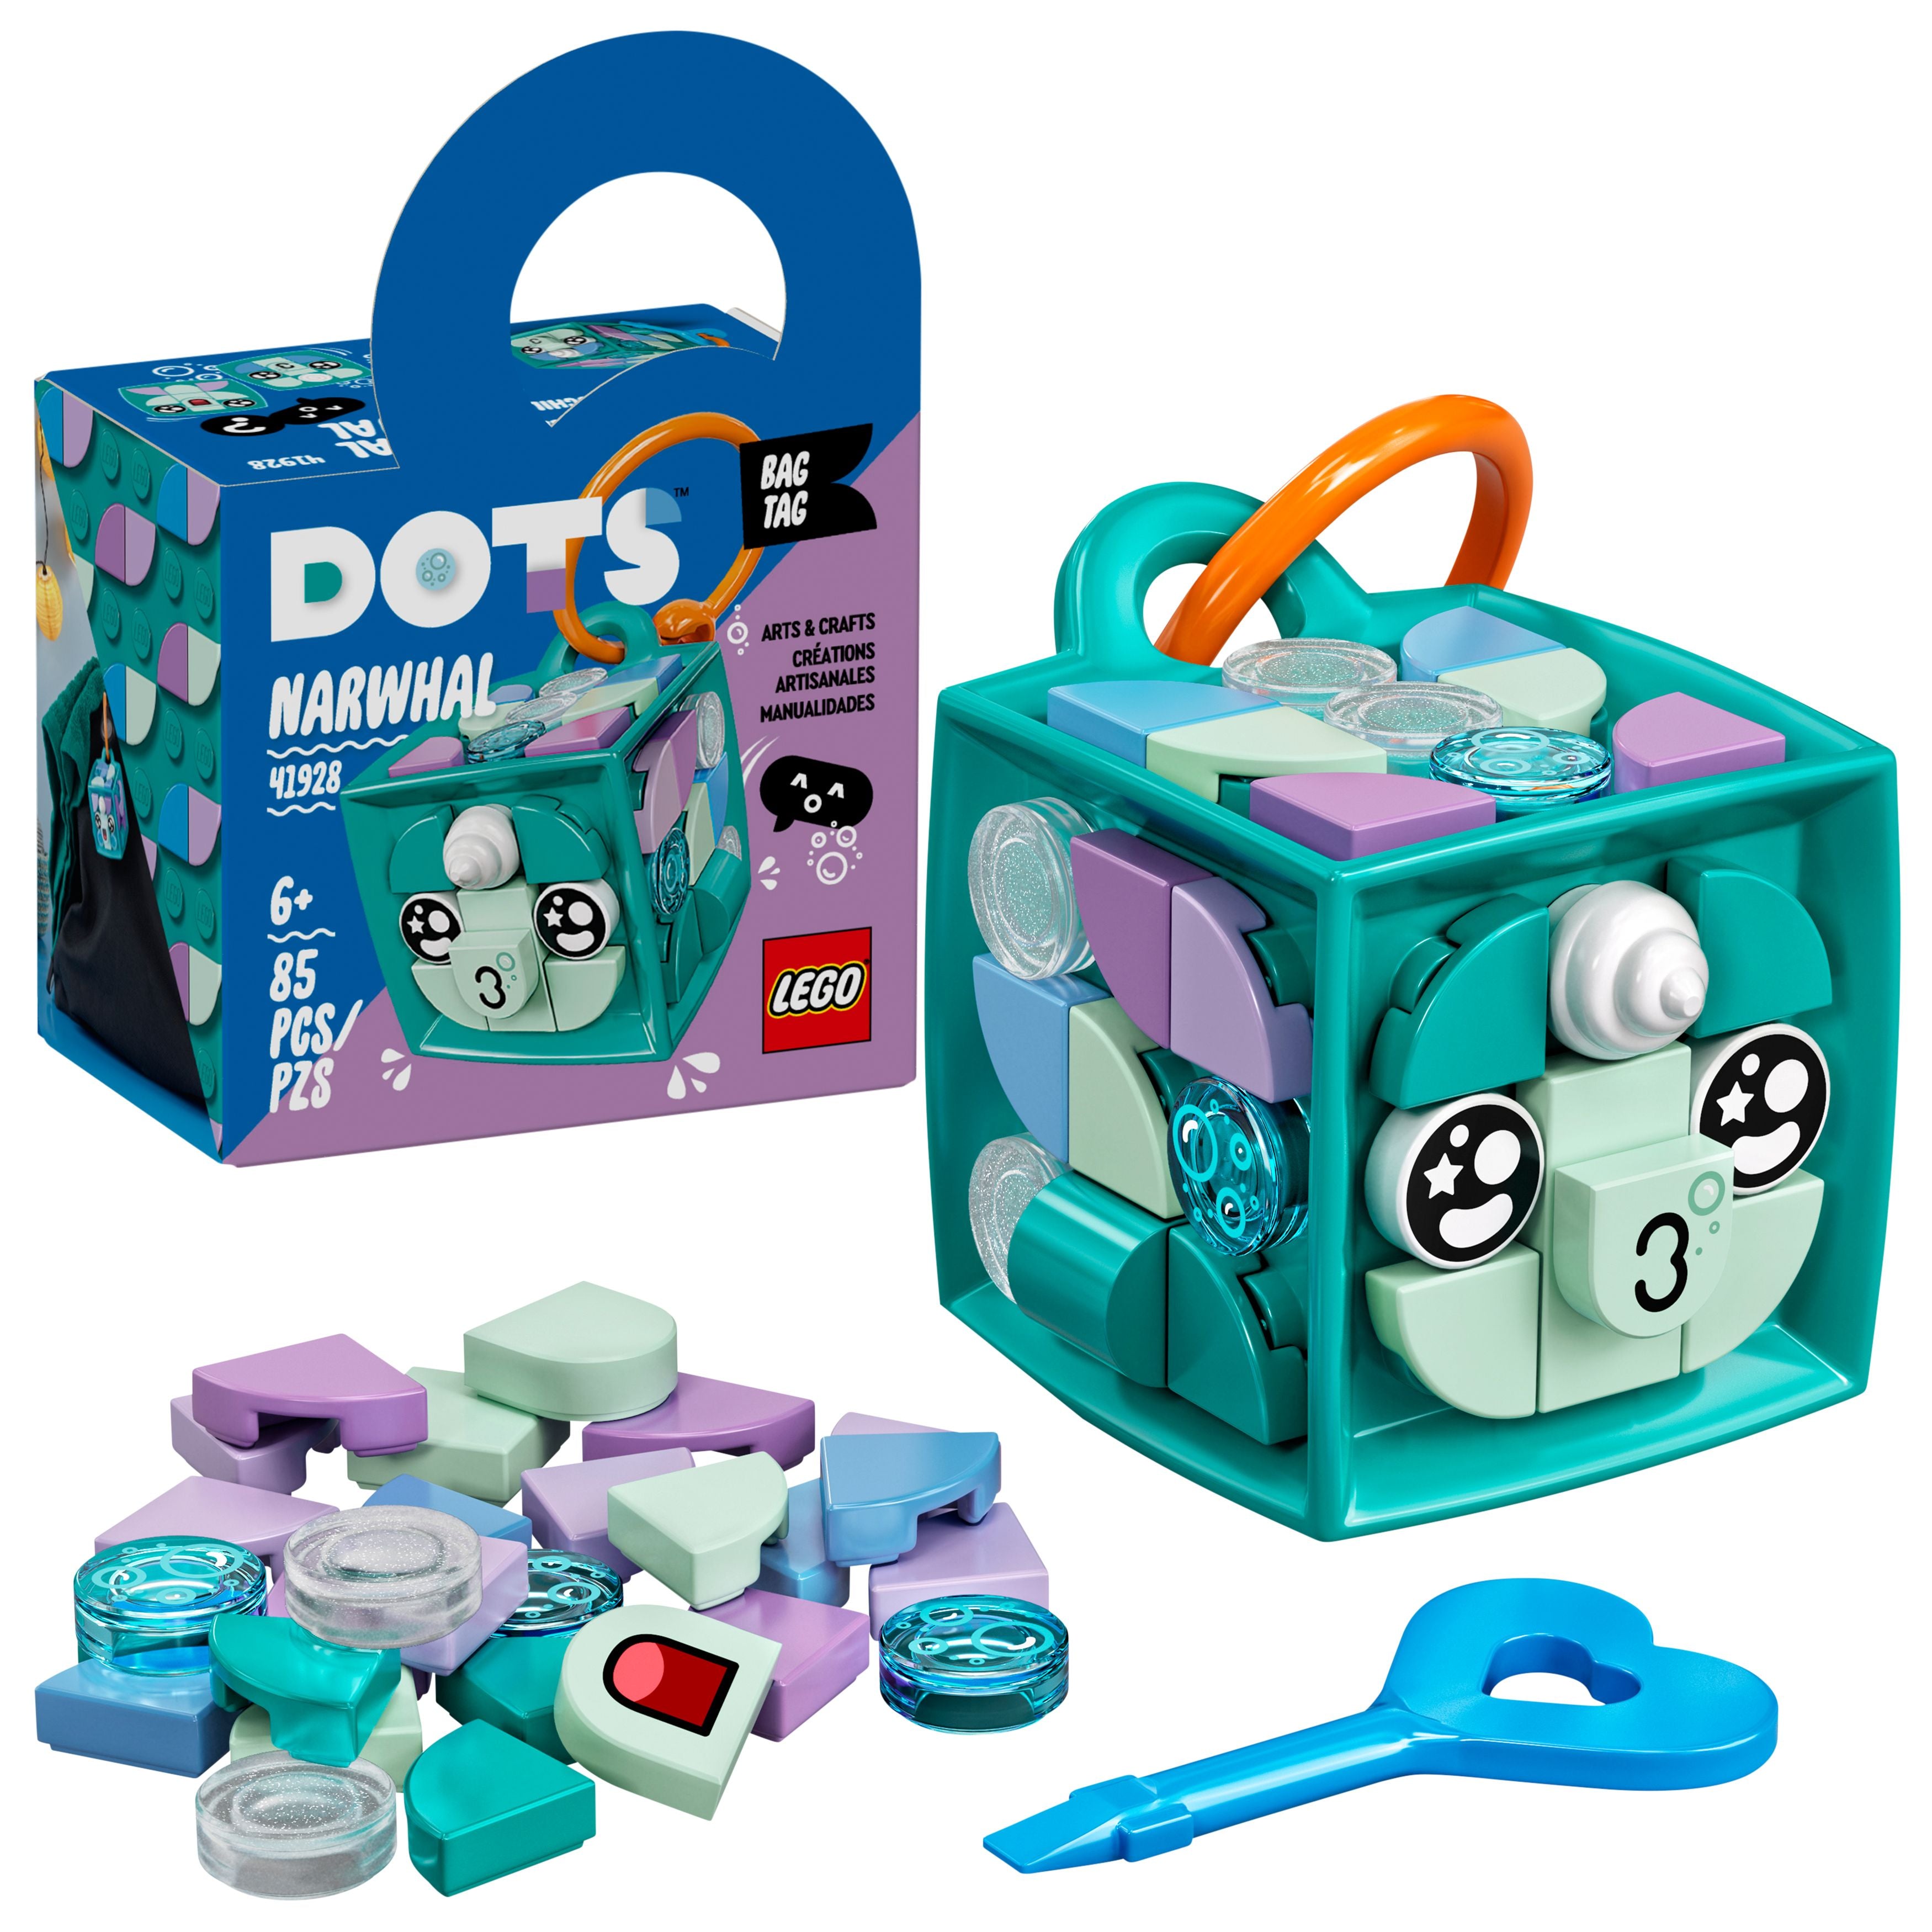 LEGO: DOTS - Bag Tag Narwhal